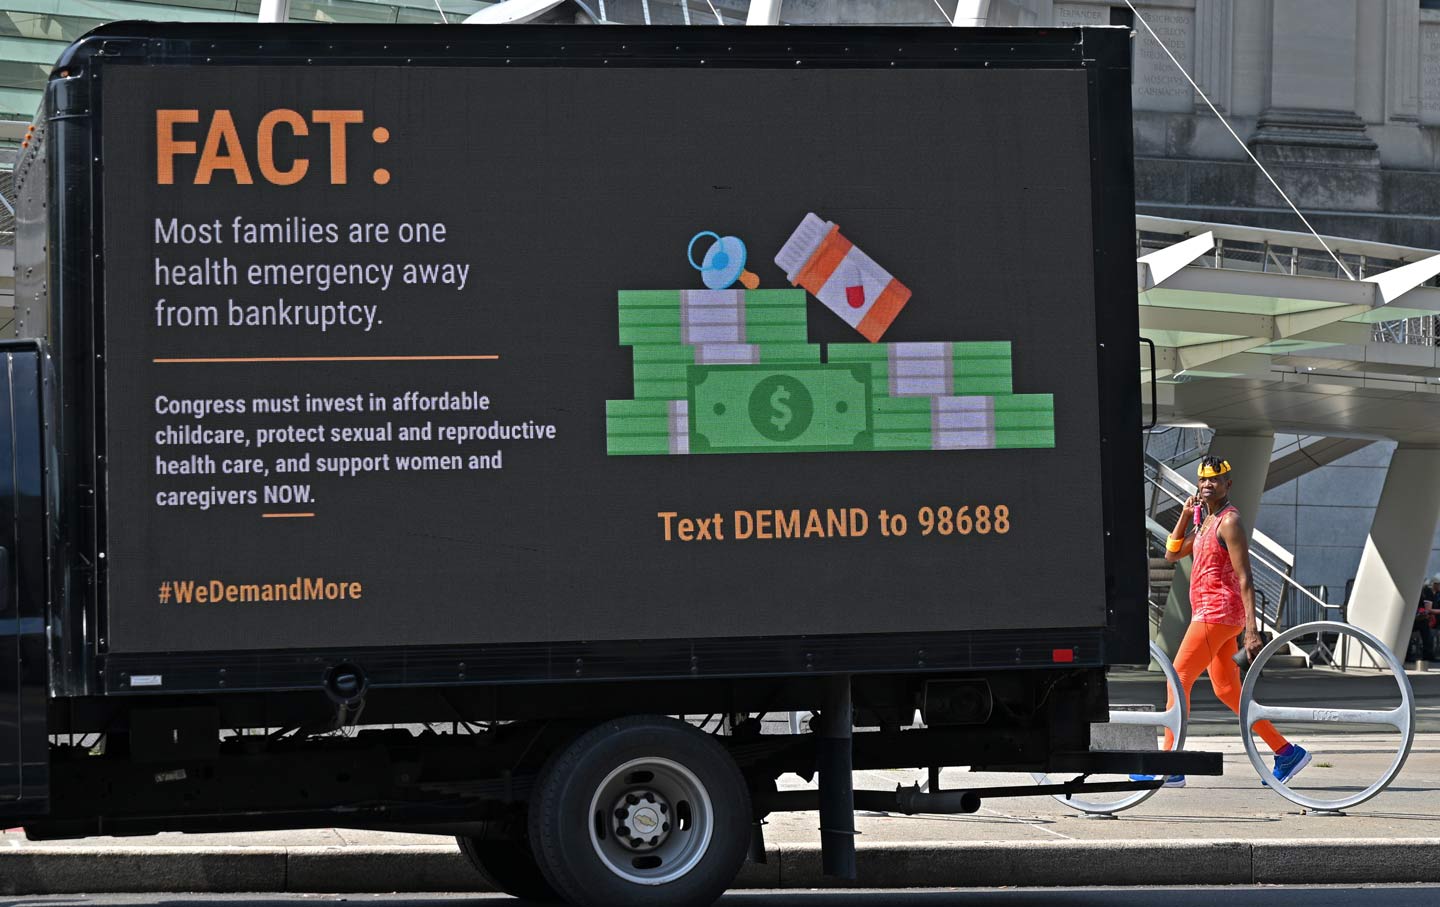 Mobile billboard in favor of sexual and reproductive health care